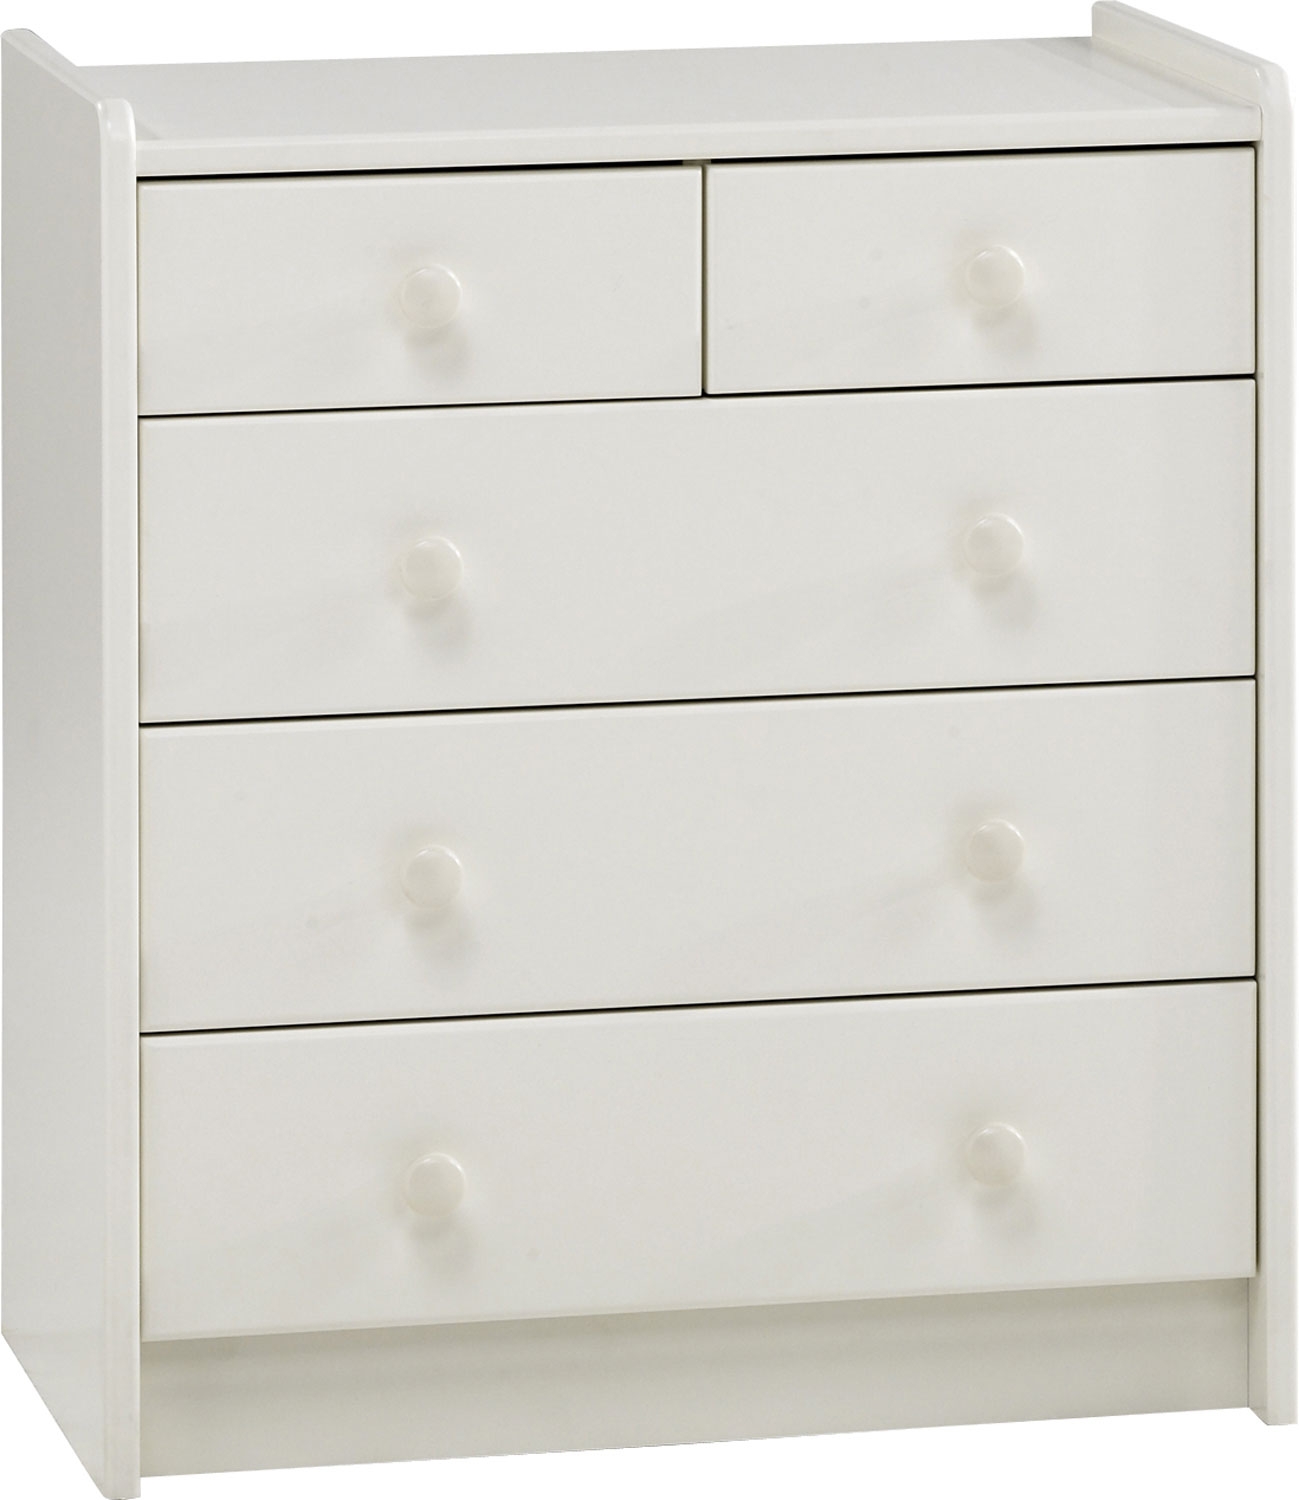 Steens for Kids White 2 3 Chest of Drawers